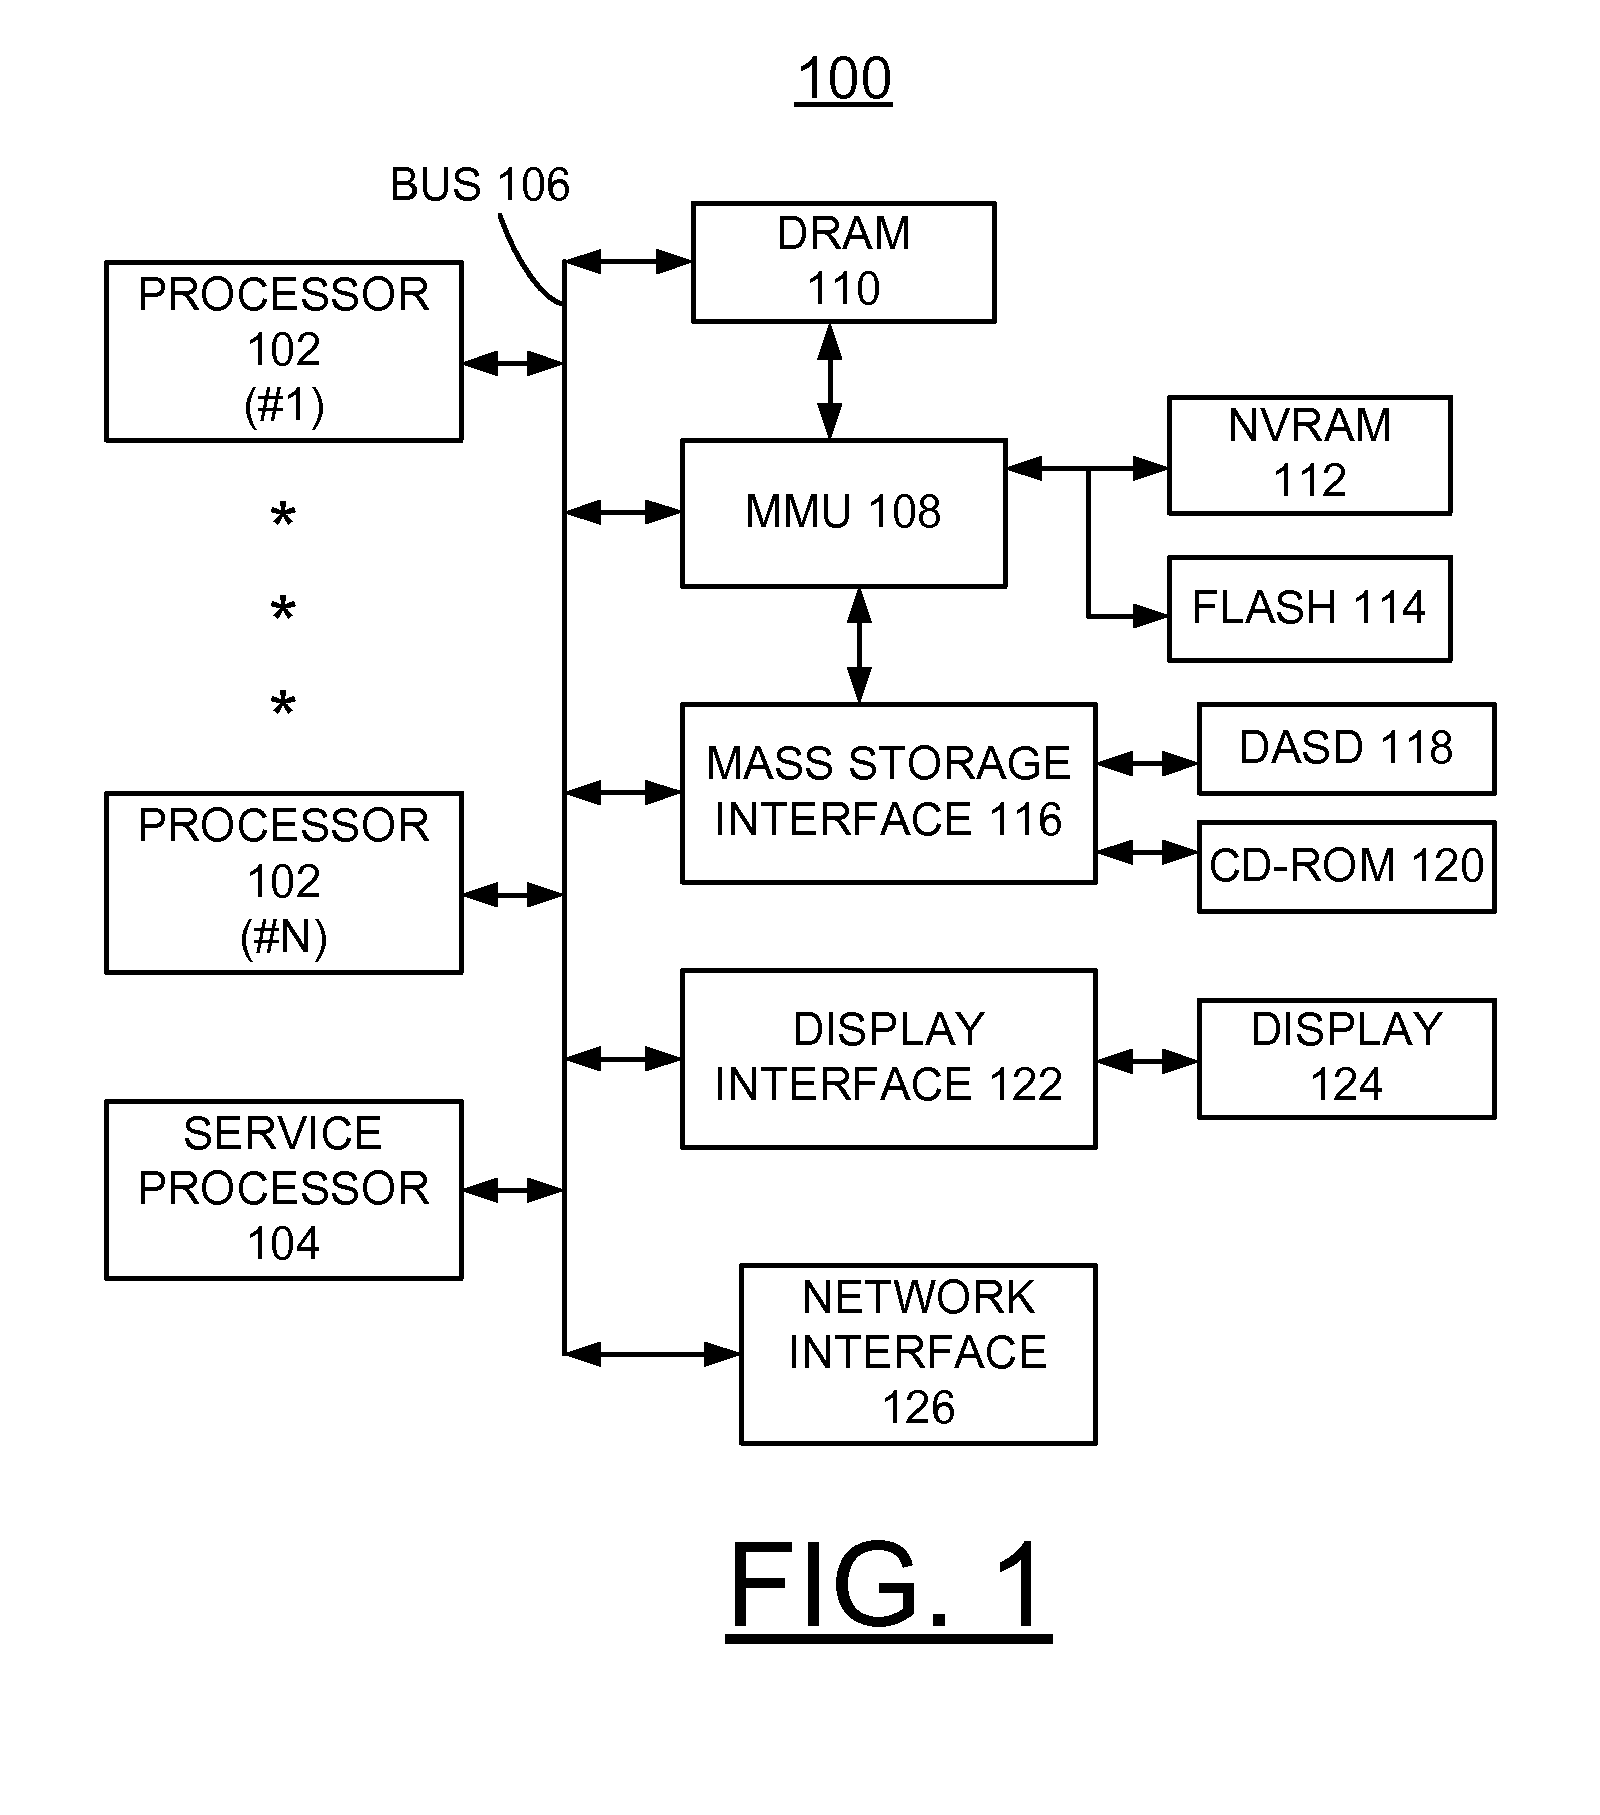 Dynamically allocating limited system memory for DMA among multiple adapters